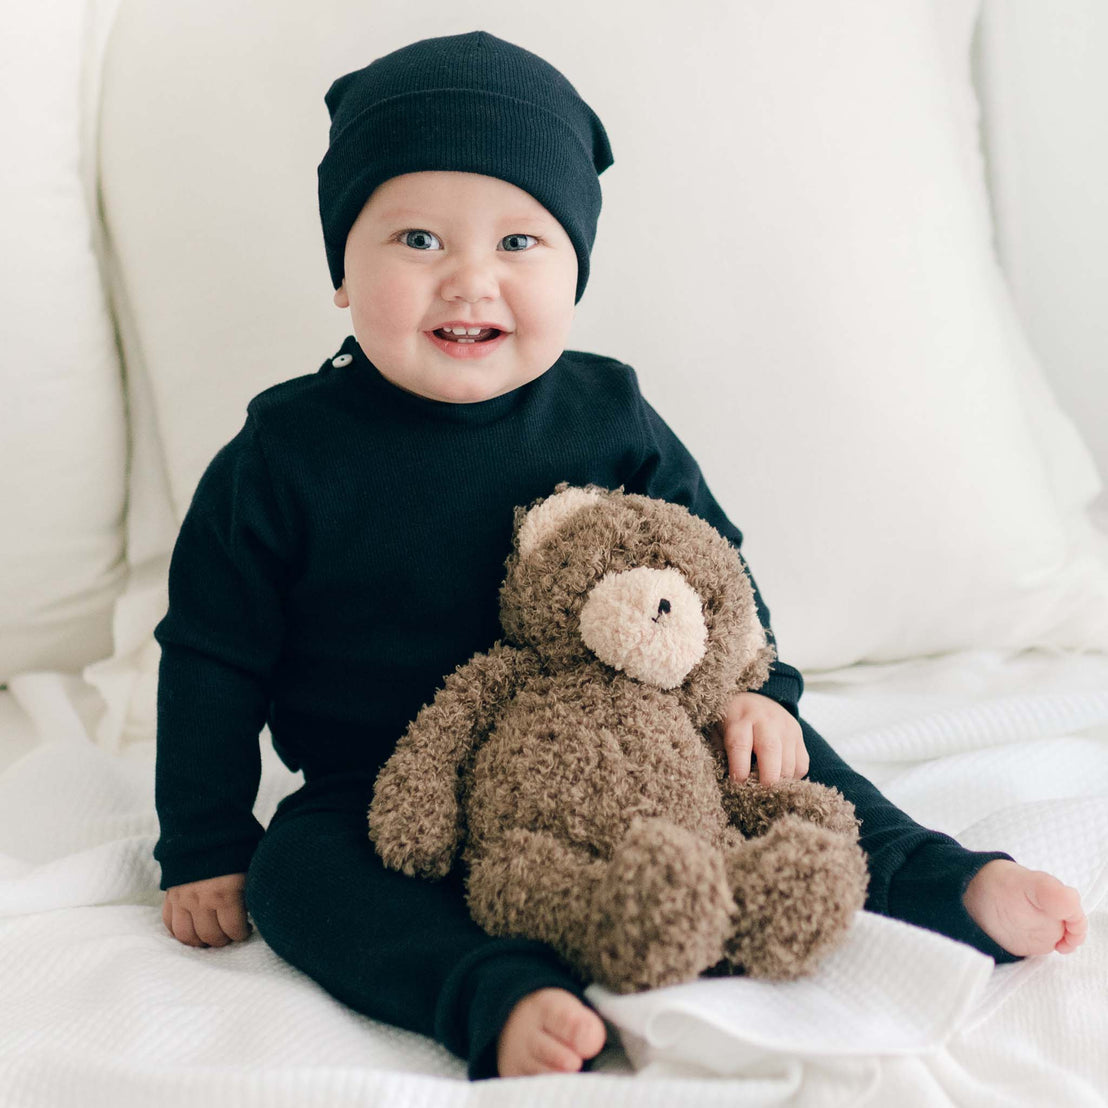 Smiling baby boy sitting the Elliott Personalized Blanket. He is wearing the Elliott Navy Ribbed Cotton Top & Leggings, including the Navy Ribbed Pima Beanie. He is also holding the Cubby Bear.